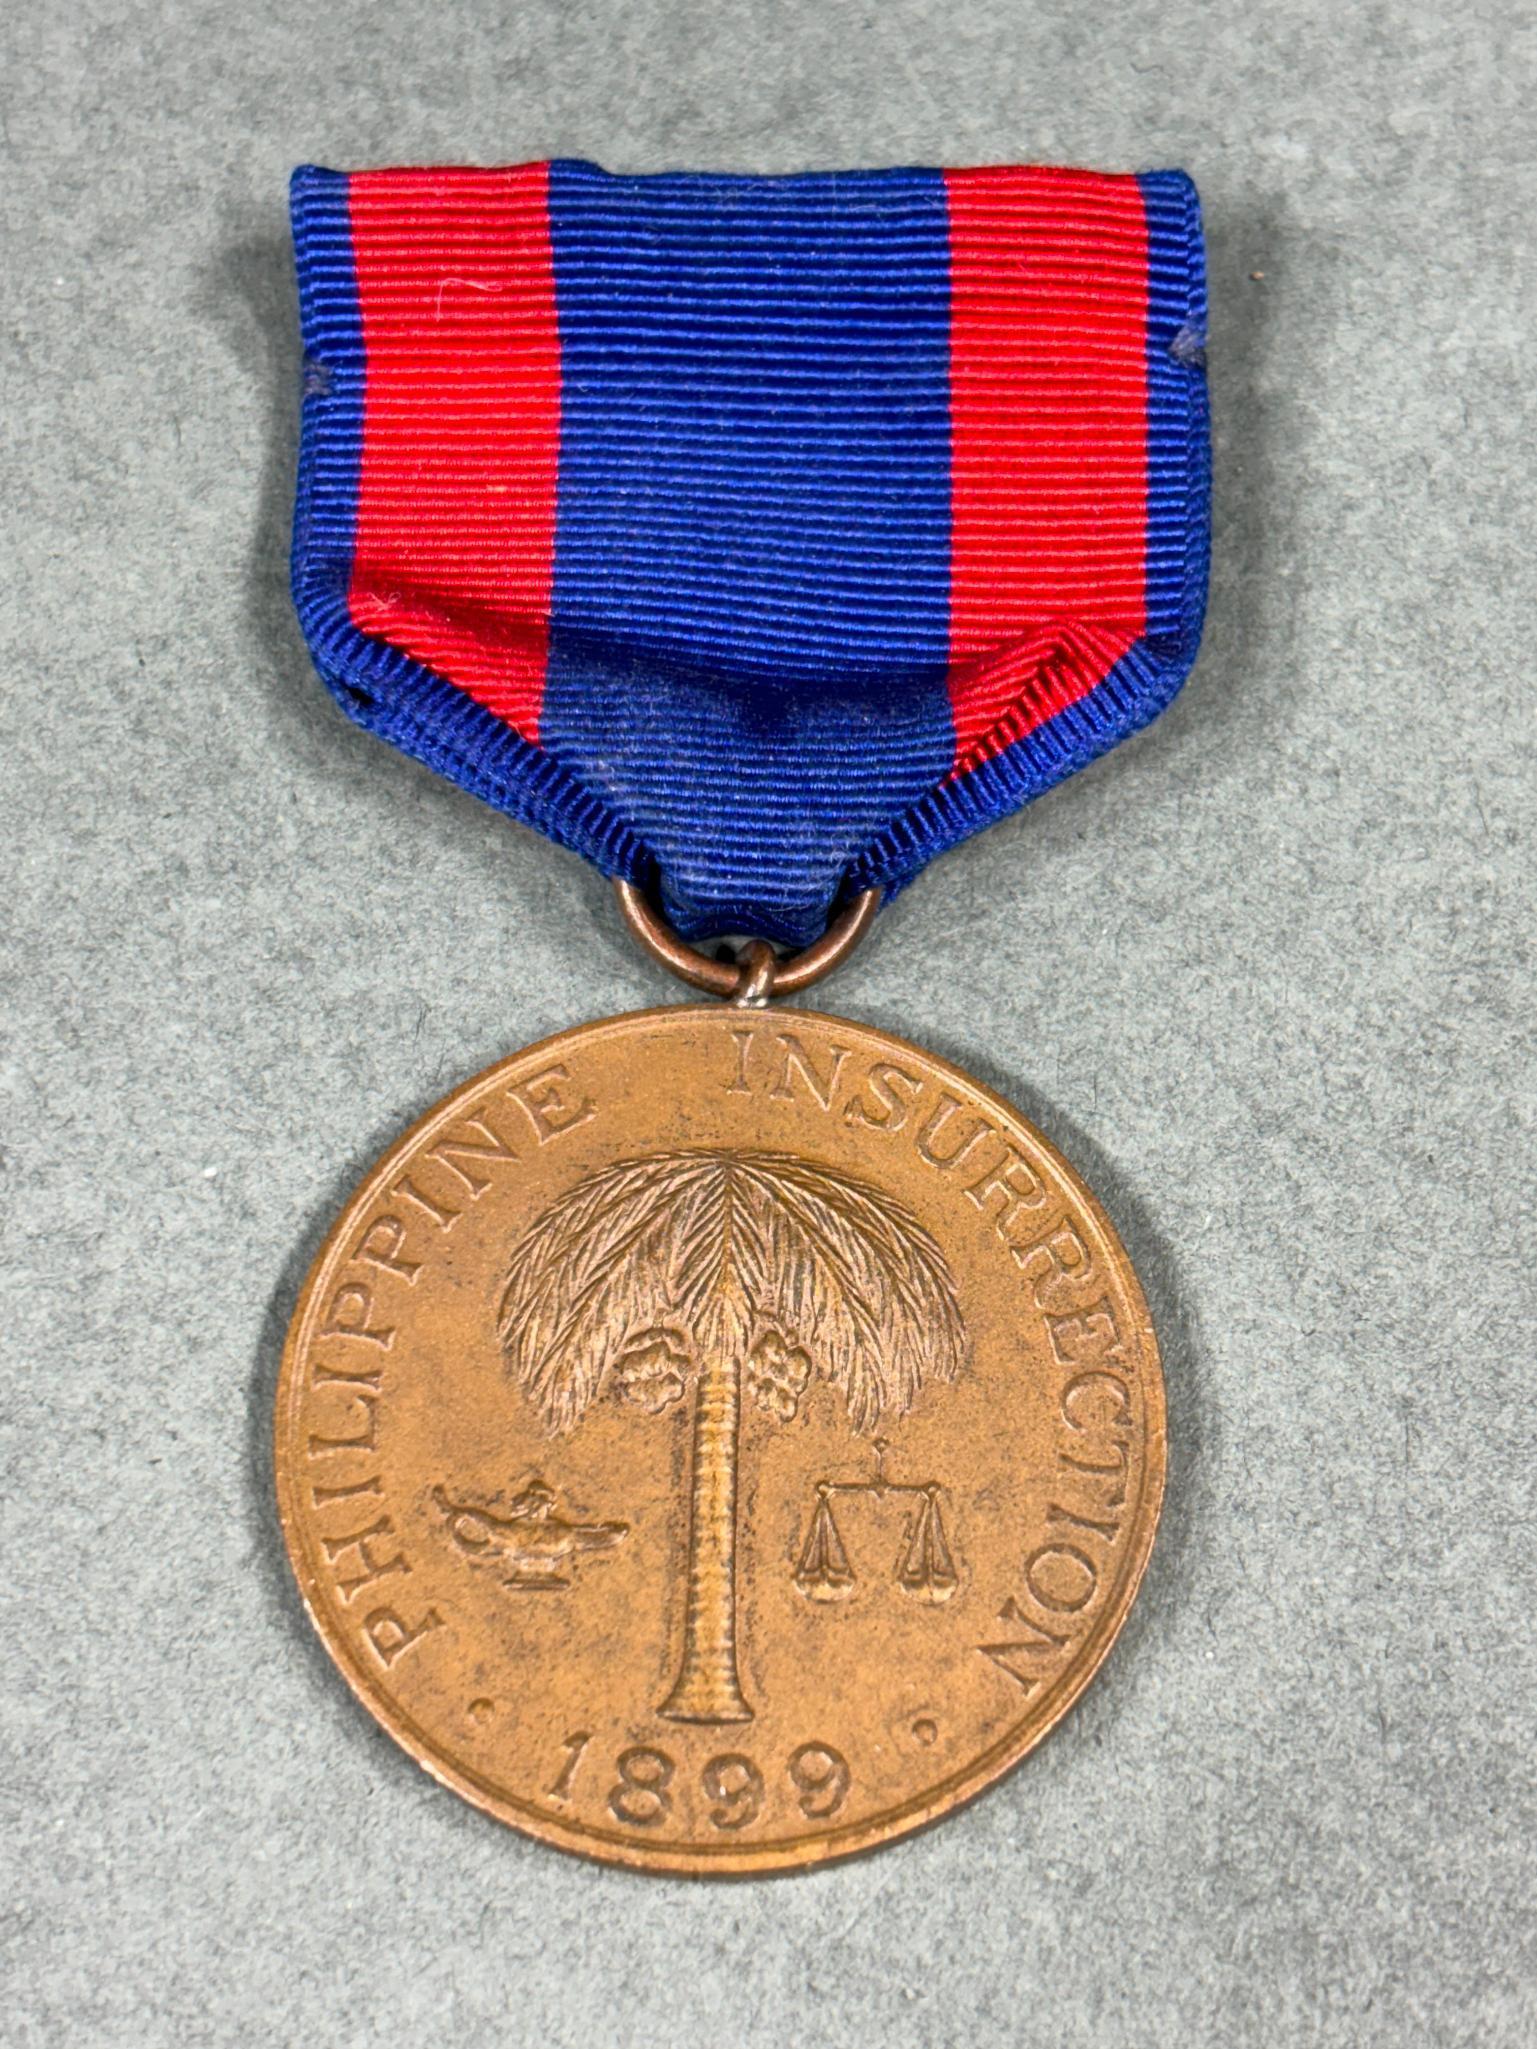 PHILIPPINE INSURRECTION NUMBERED MEDAL